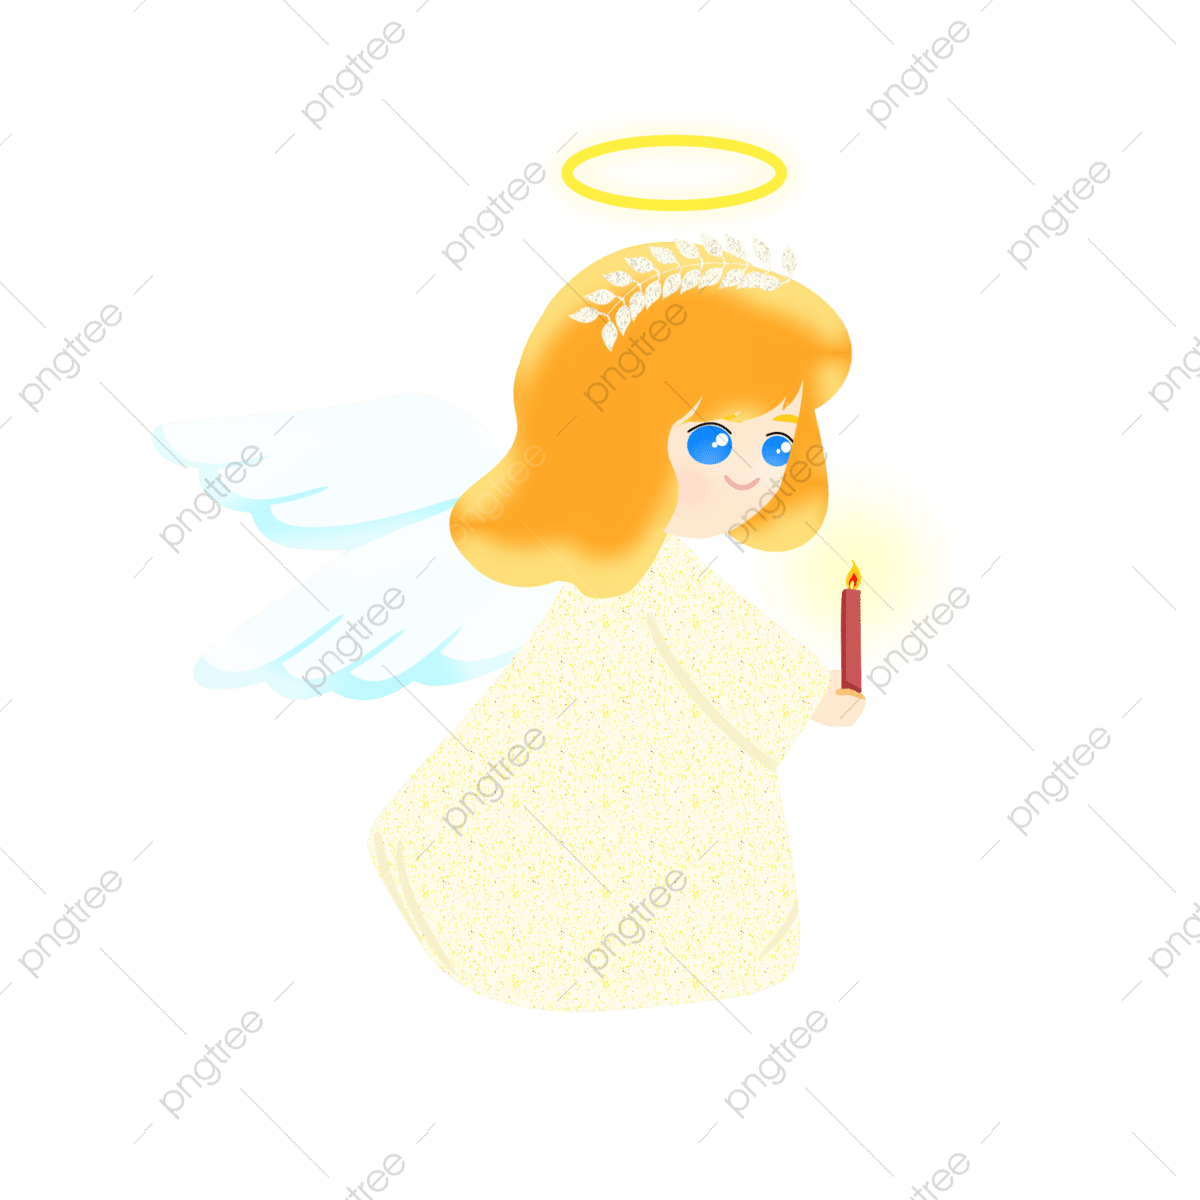 Angel Halo PNG Background